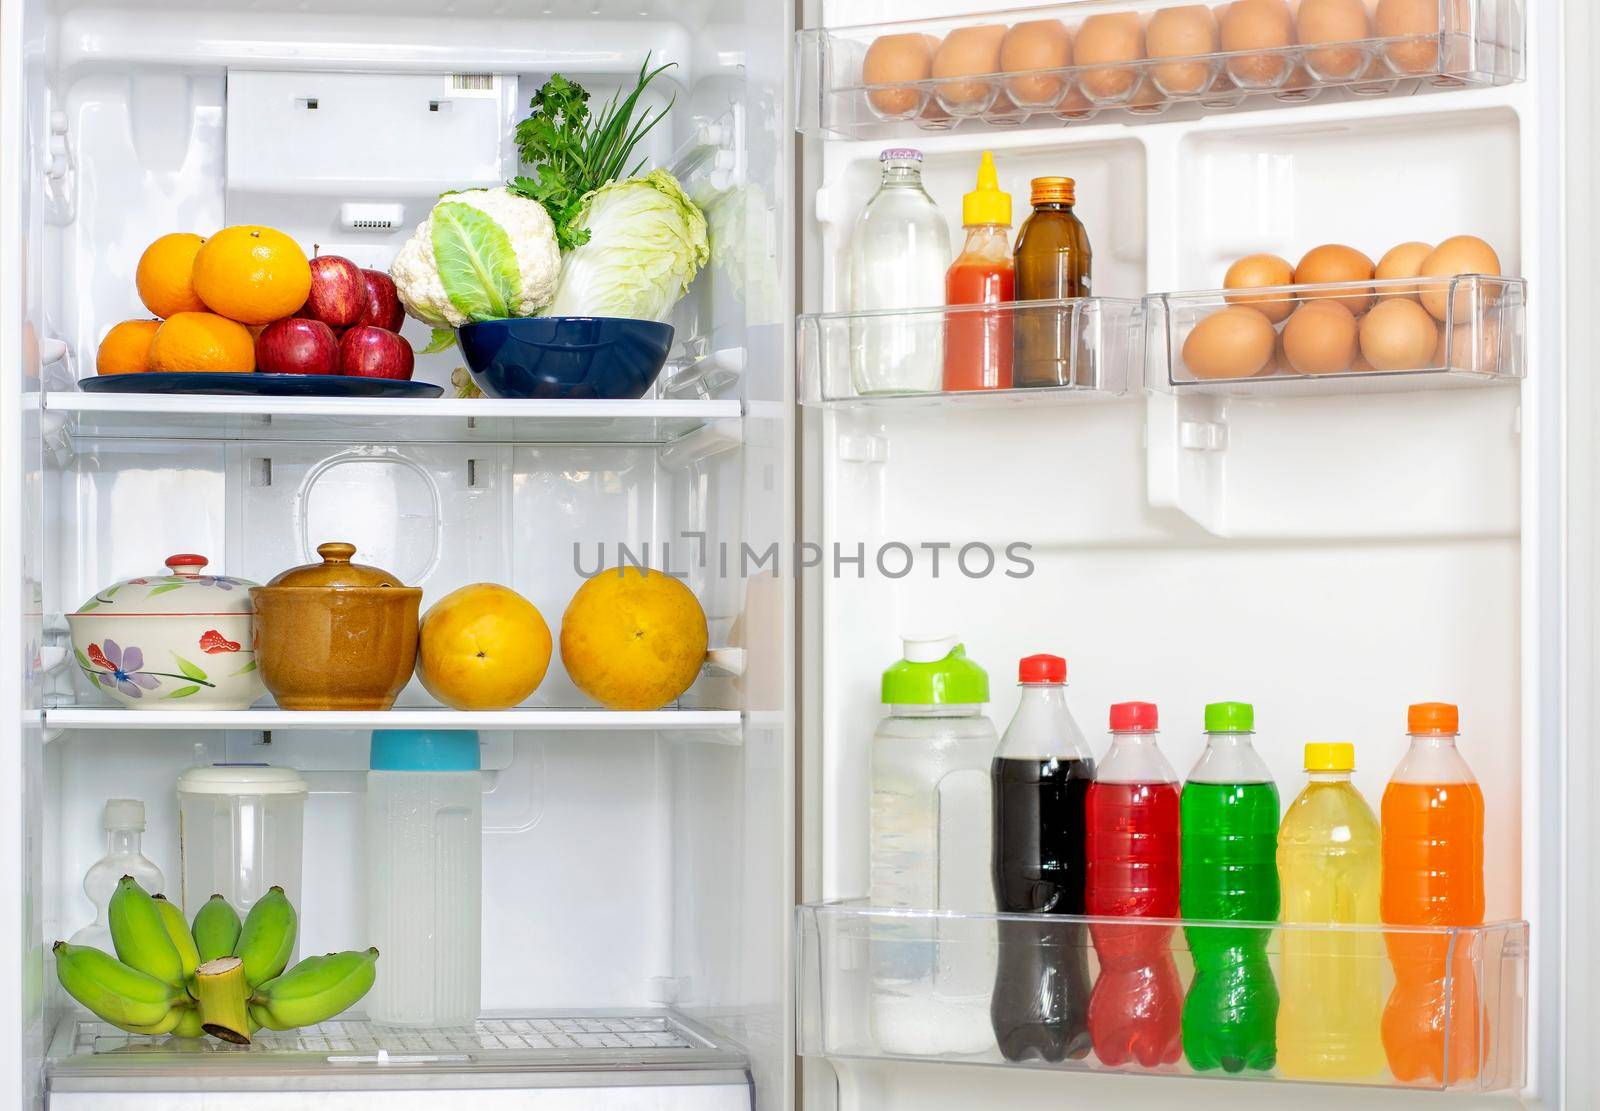 Look into the refrigerator with the lid open a lots of fresh food and drinks inside. by wattanaphob